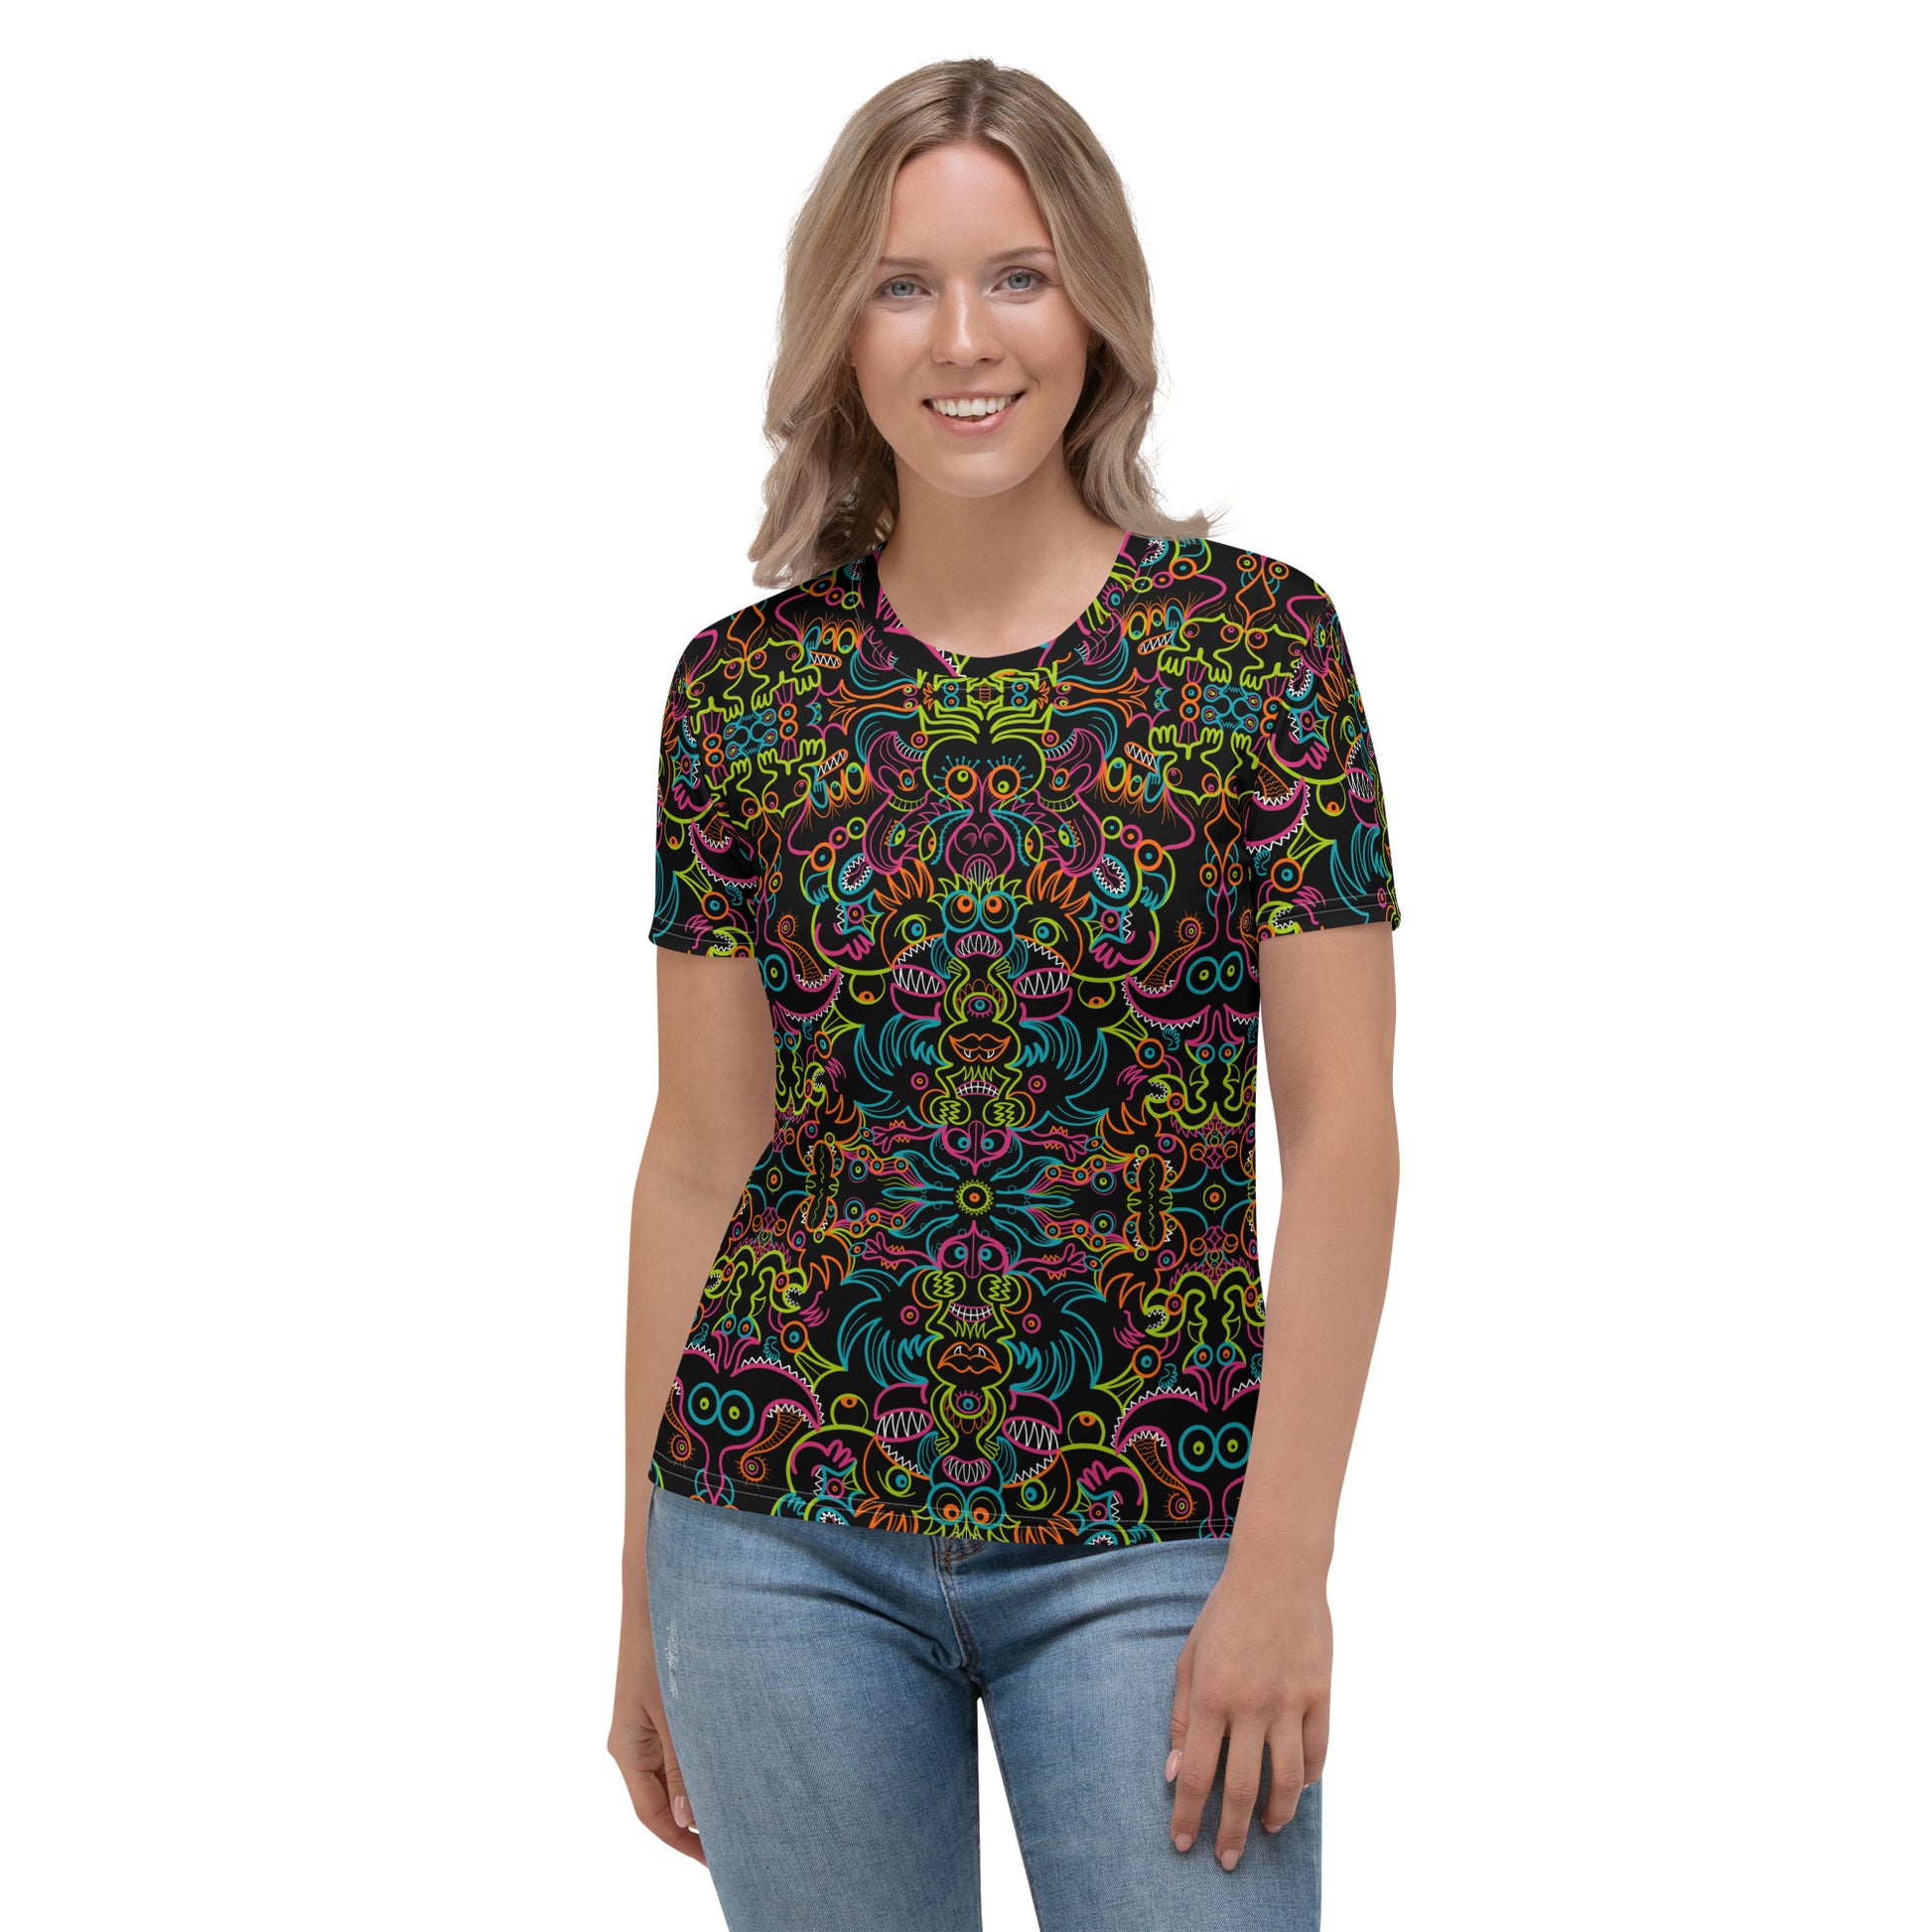 Doodle Carnival: A Kaleidoscope of Whimsical Wonders! - All-over print Women's T-shirt. Front view